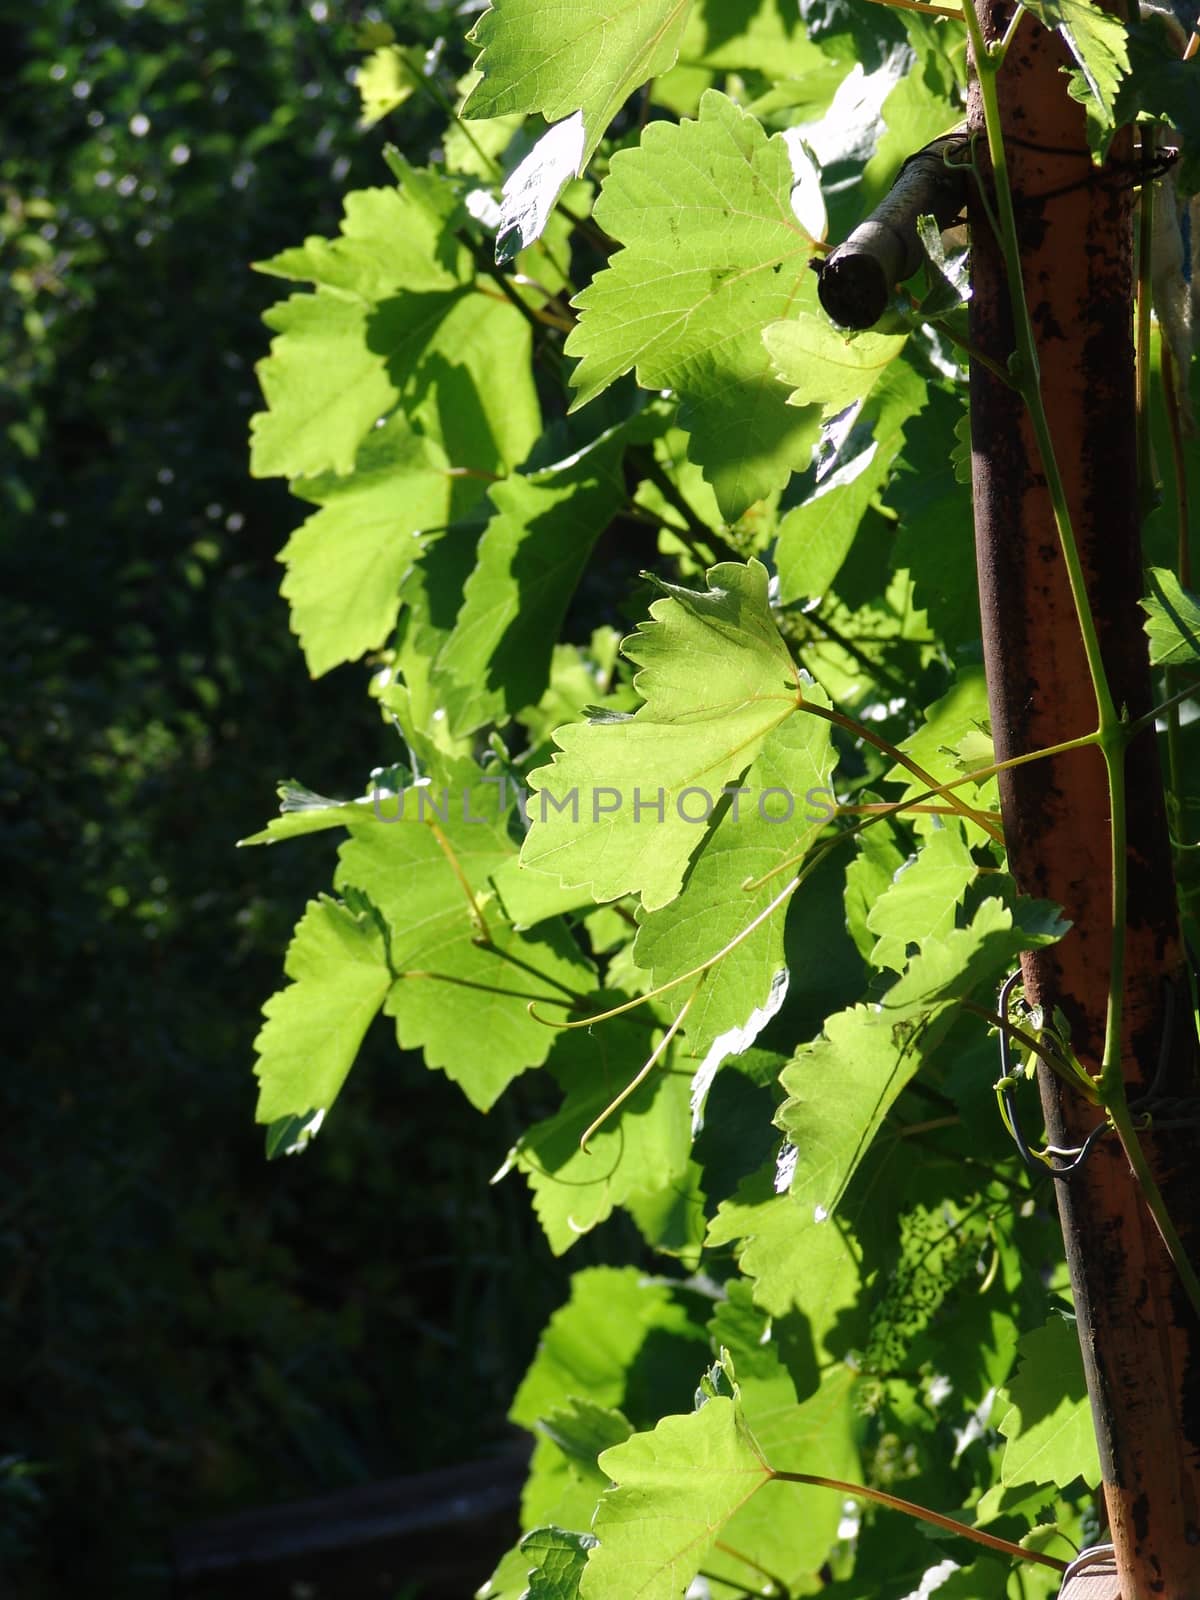 Grapes leaves in a vineyard by elena_vz